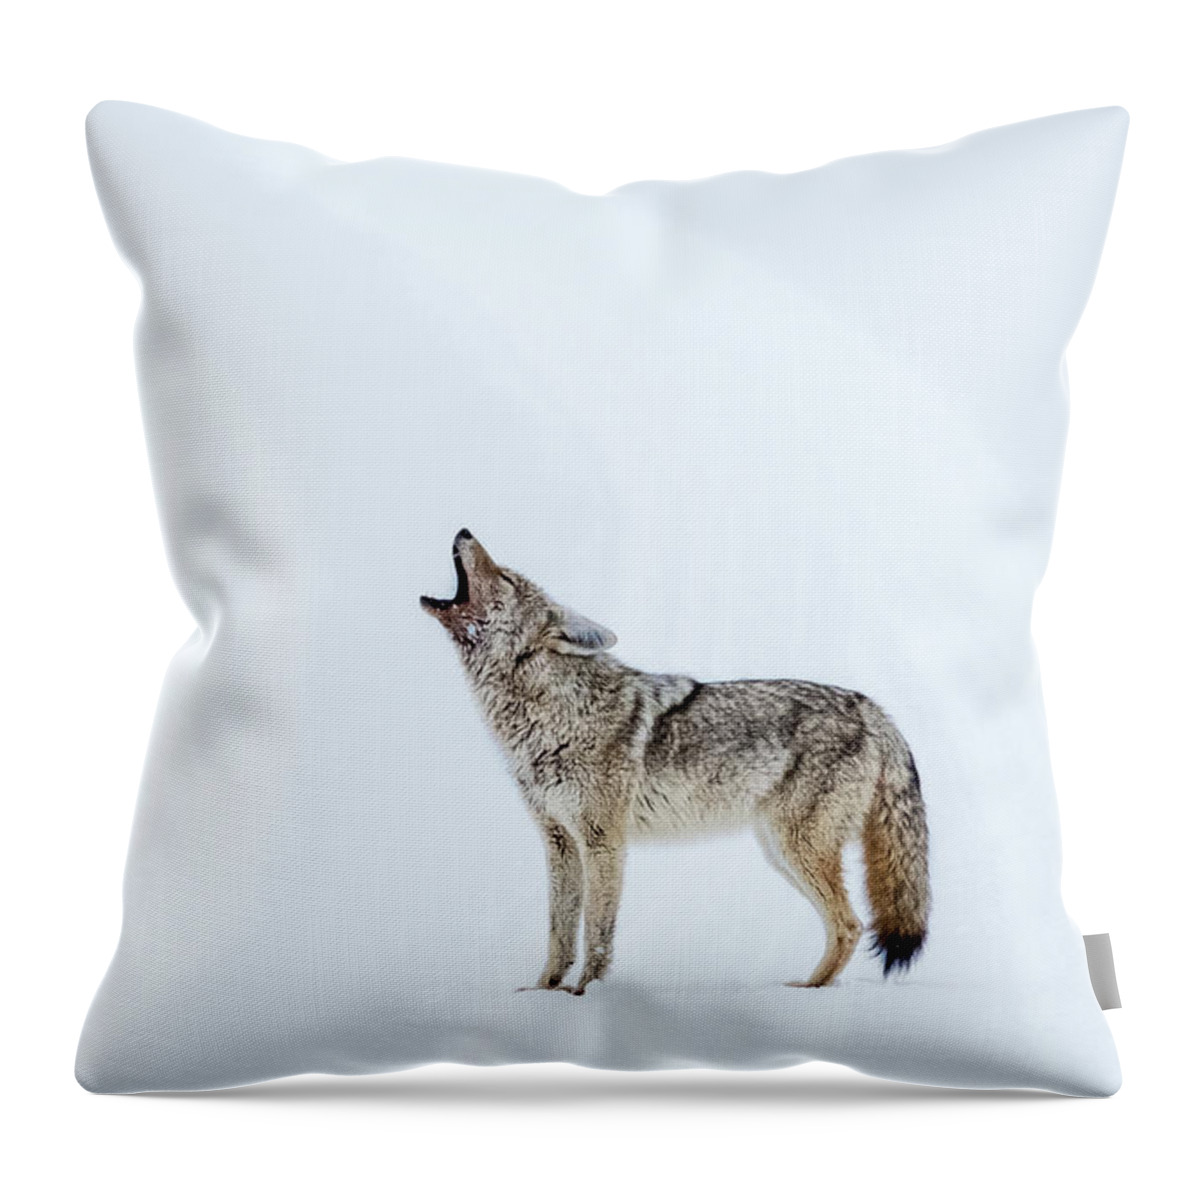 Snow Throw Pillow featuring the photograph Howling Coyote - Yellowstone by Stuart Litoff